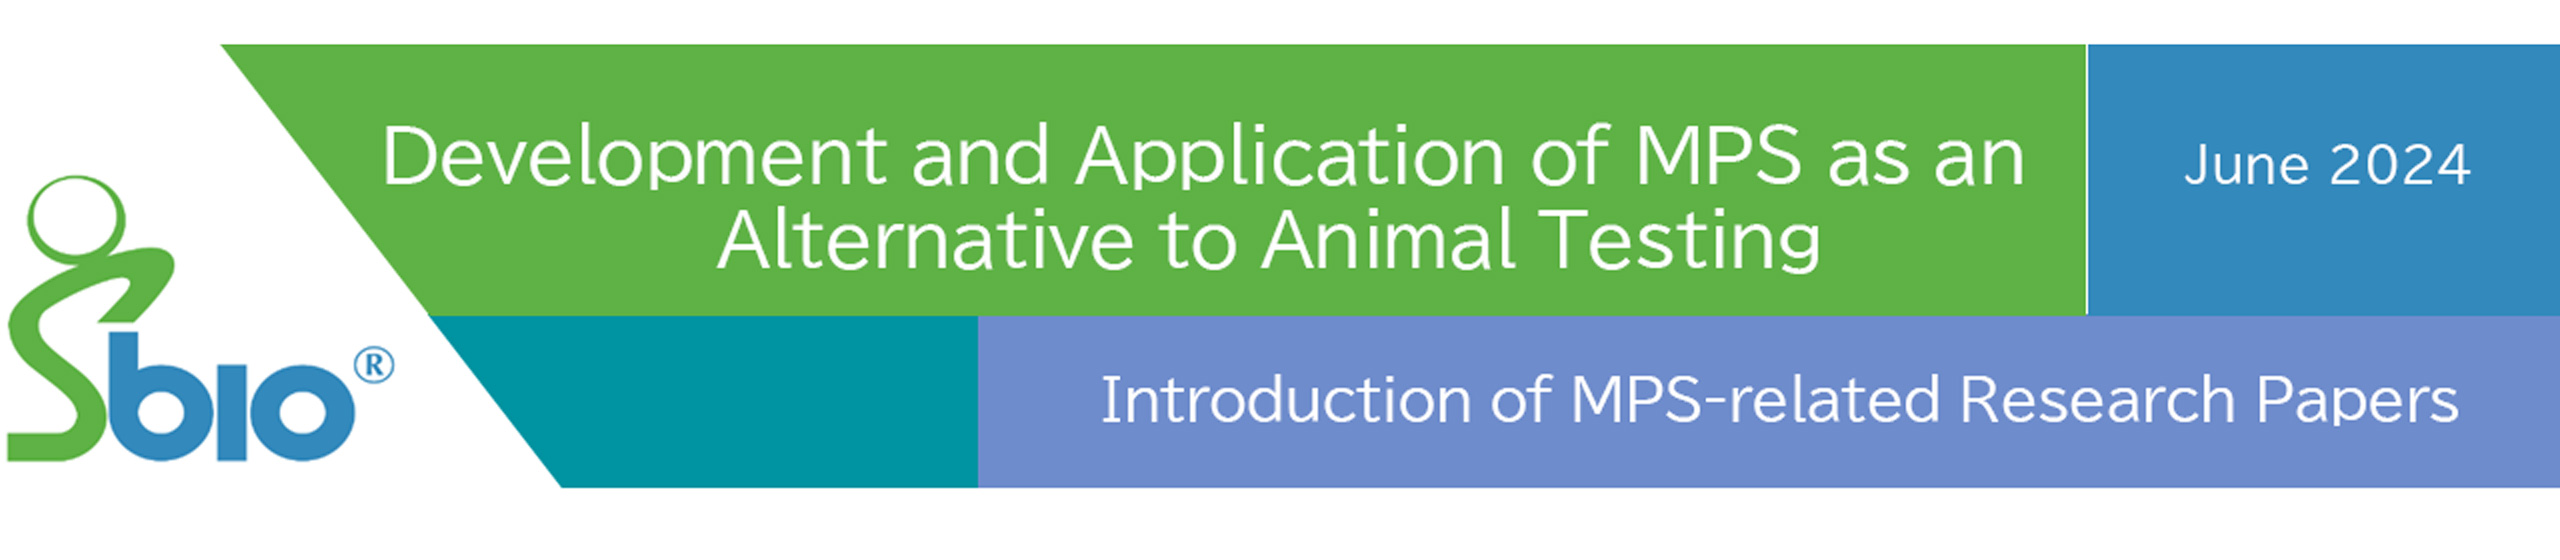 Development and Application of MPS as an Alternative to Animal Testing:/June 2024